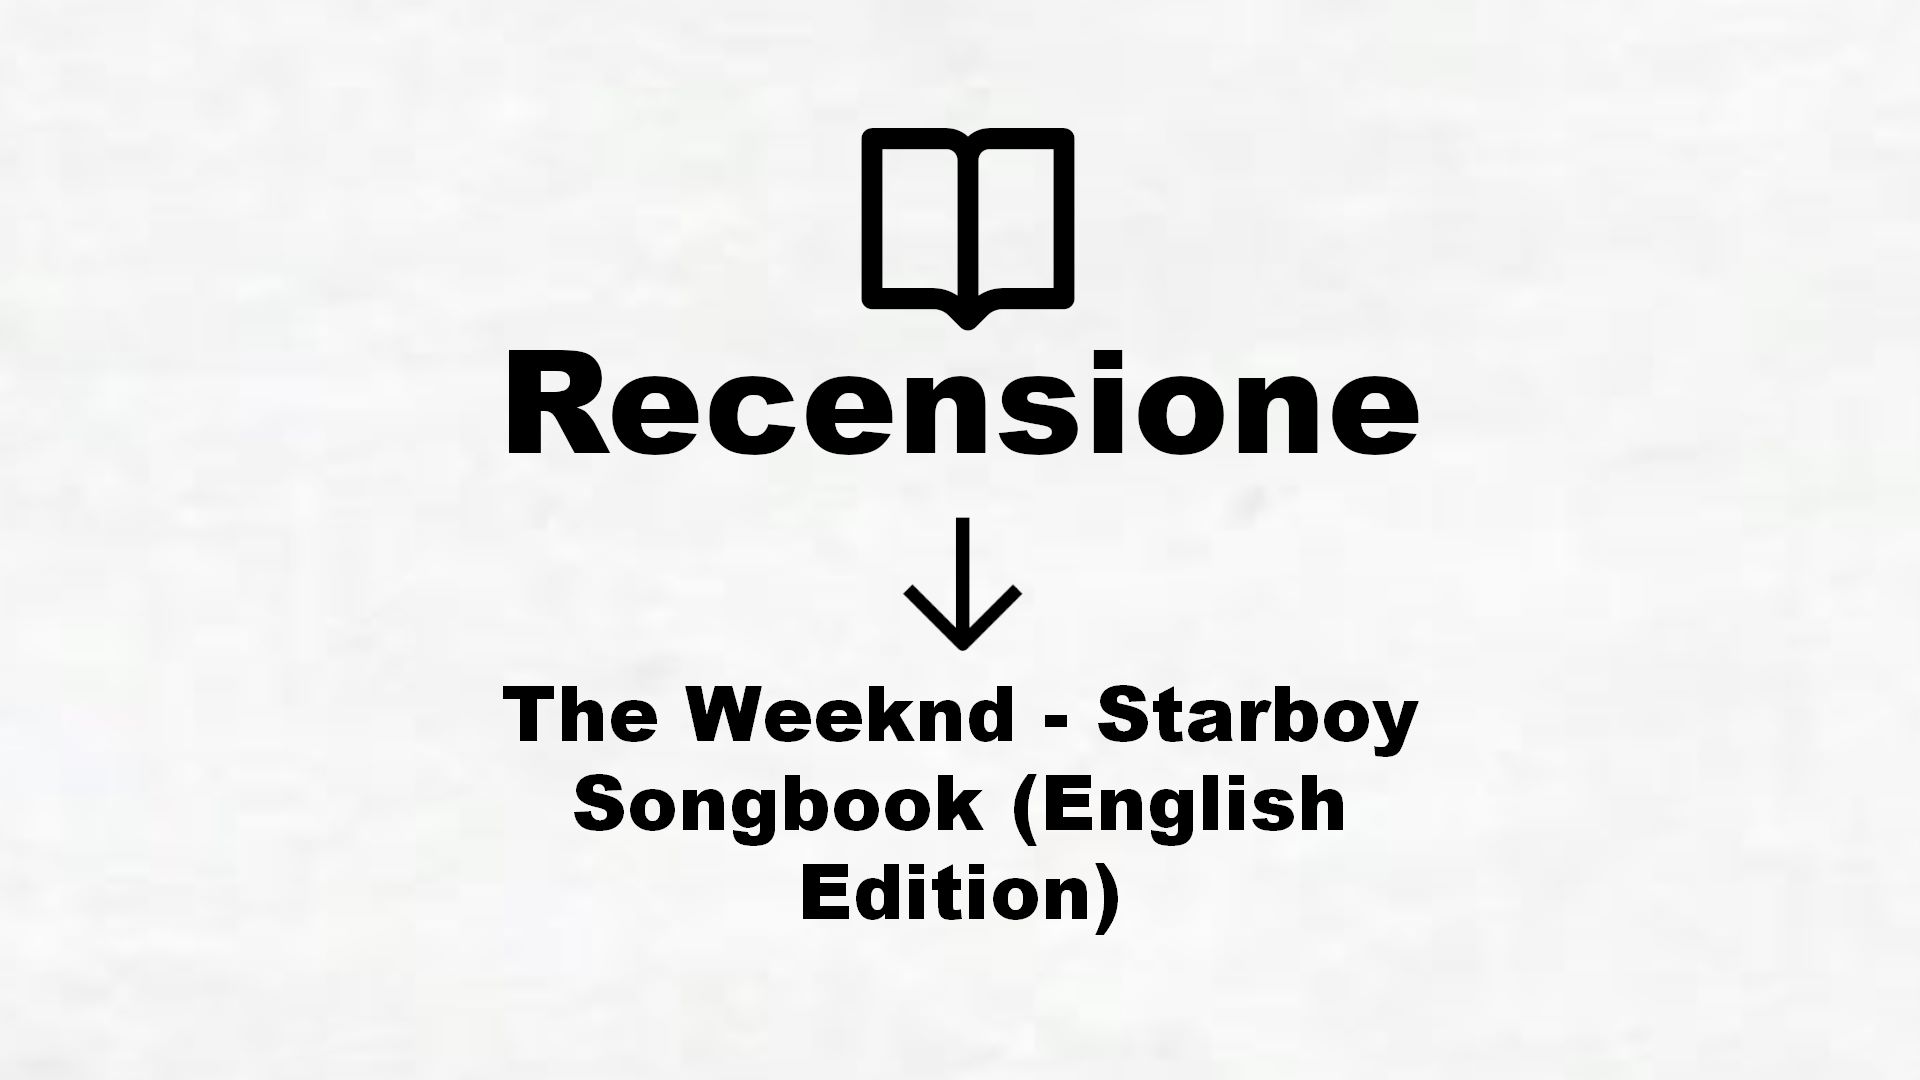 The Weeknd – Starboy Songbook (English Edition) – Recensione Libro